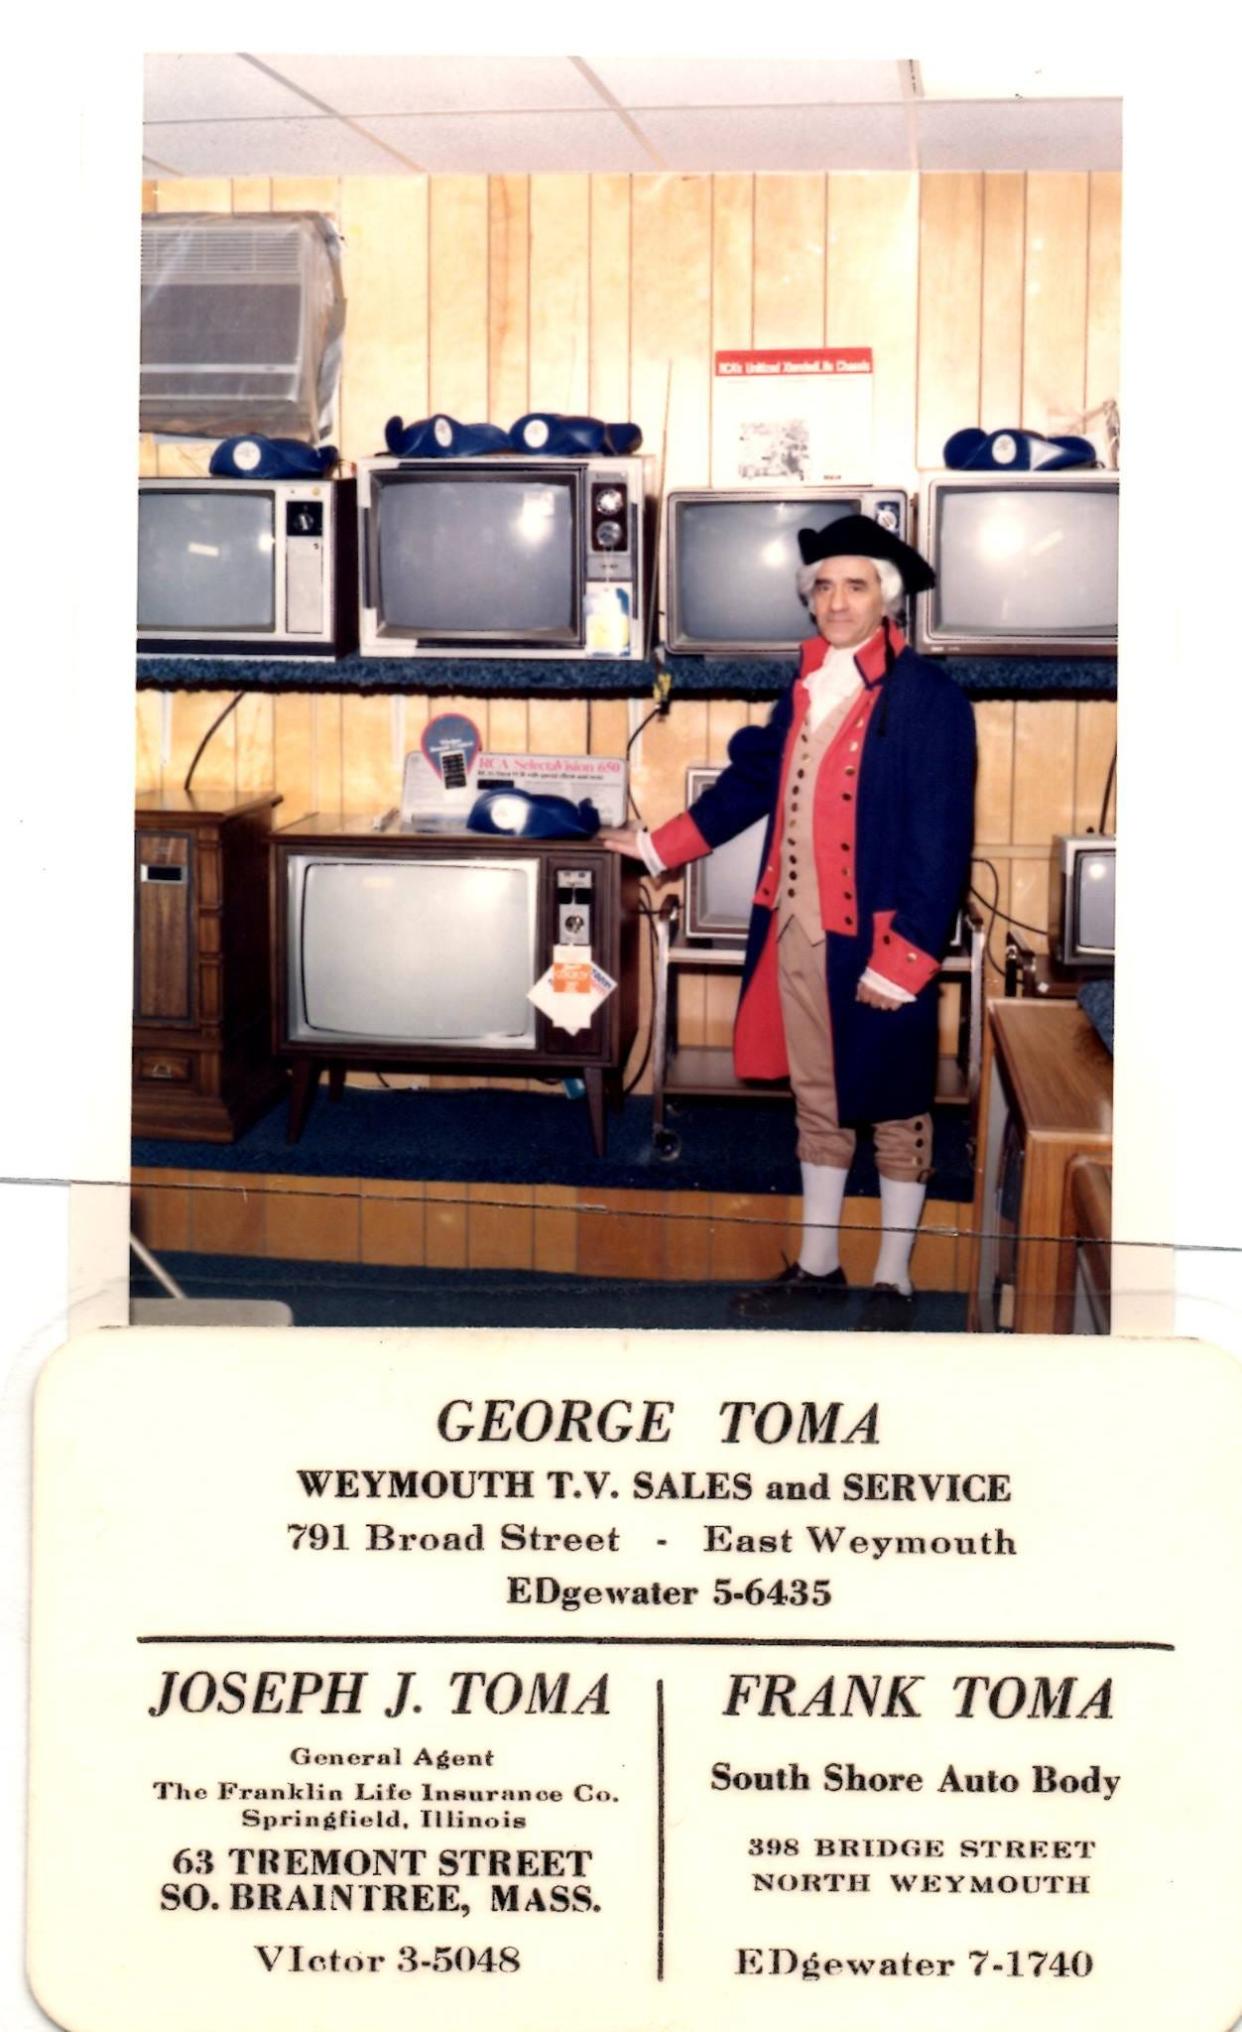 An advertisement from the 1960s-1970s shows George Washington Toma dressed in costume as George Washington on his Feb. 22 birthday in his Weymouth TV shop.